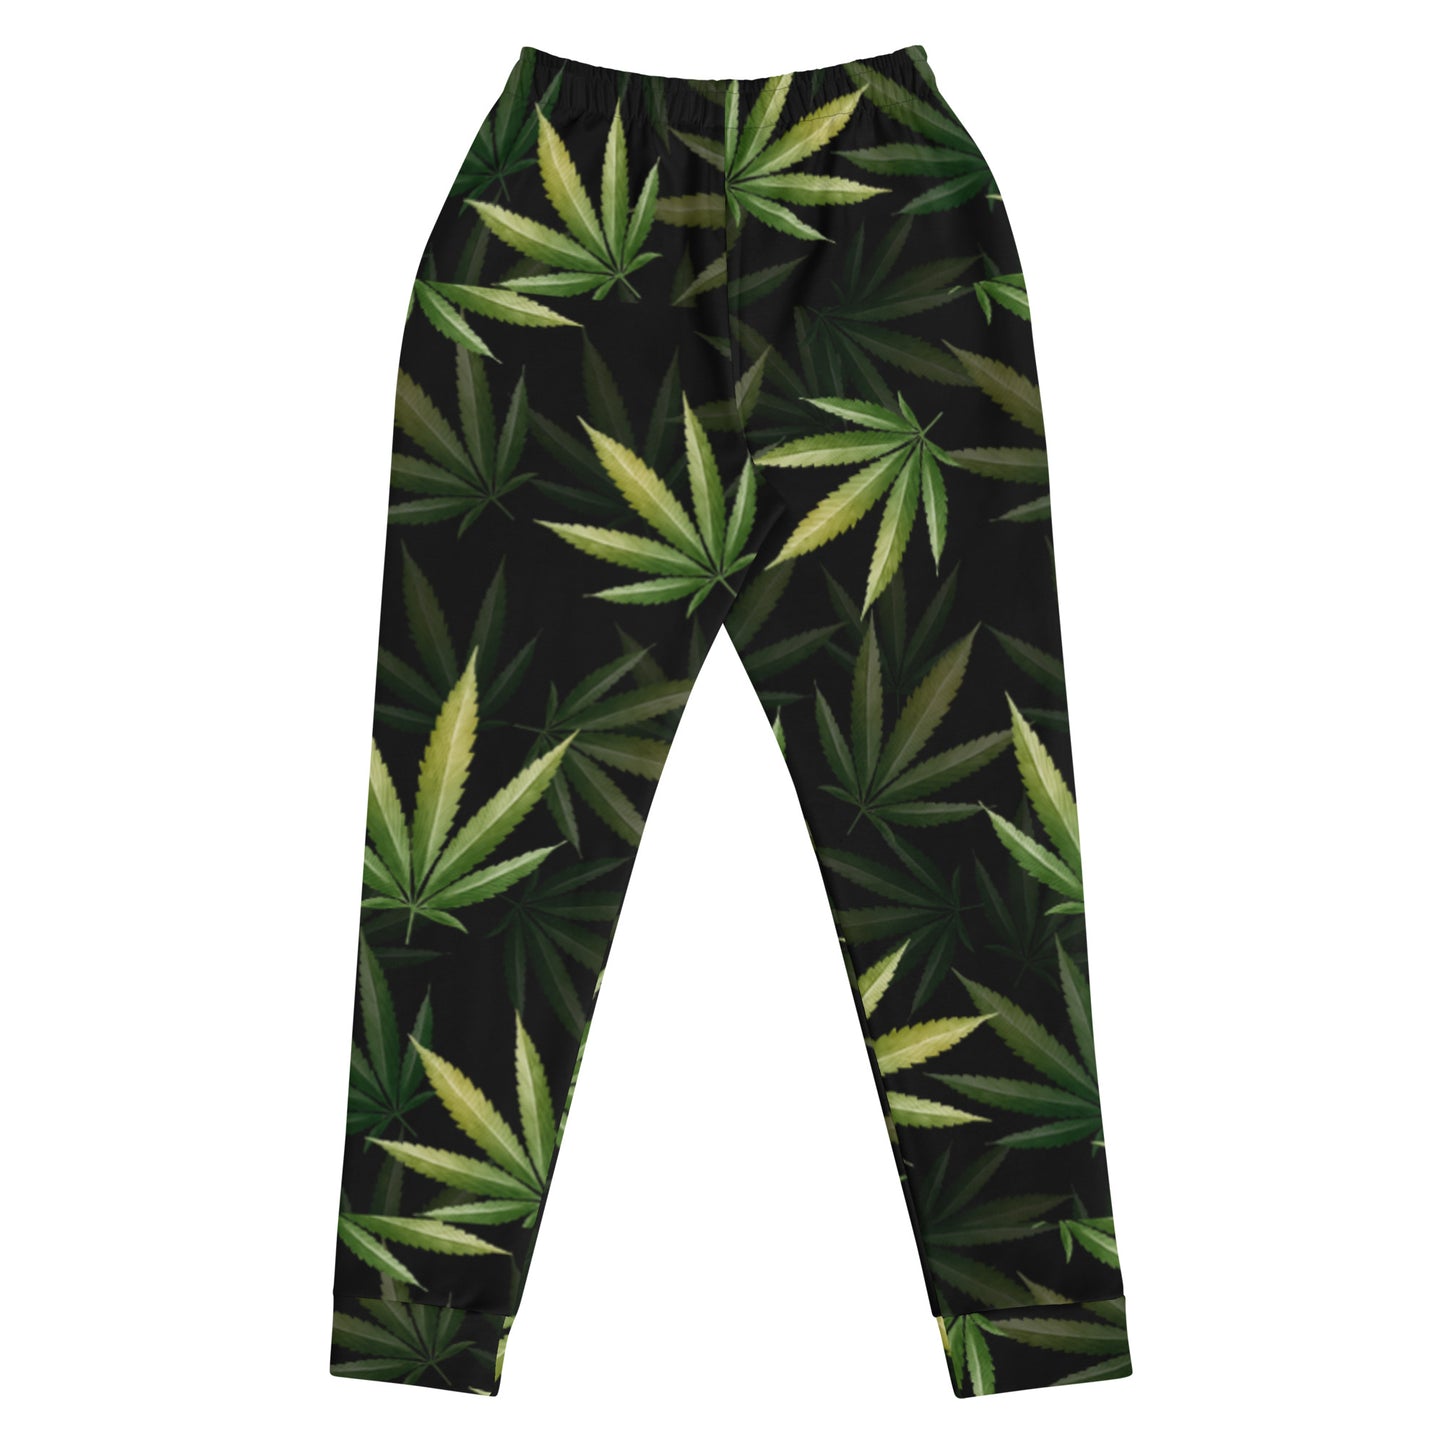 Real Cannabis Leaf Women's Joggers